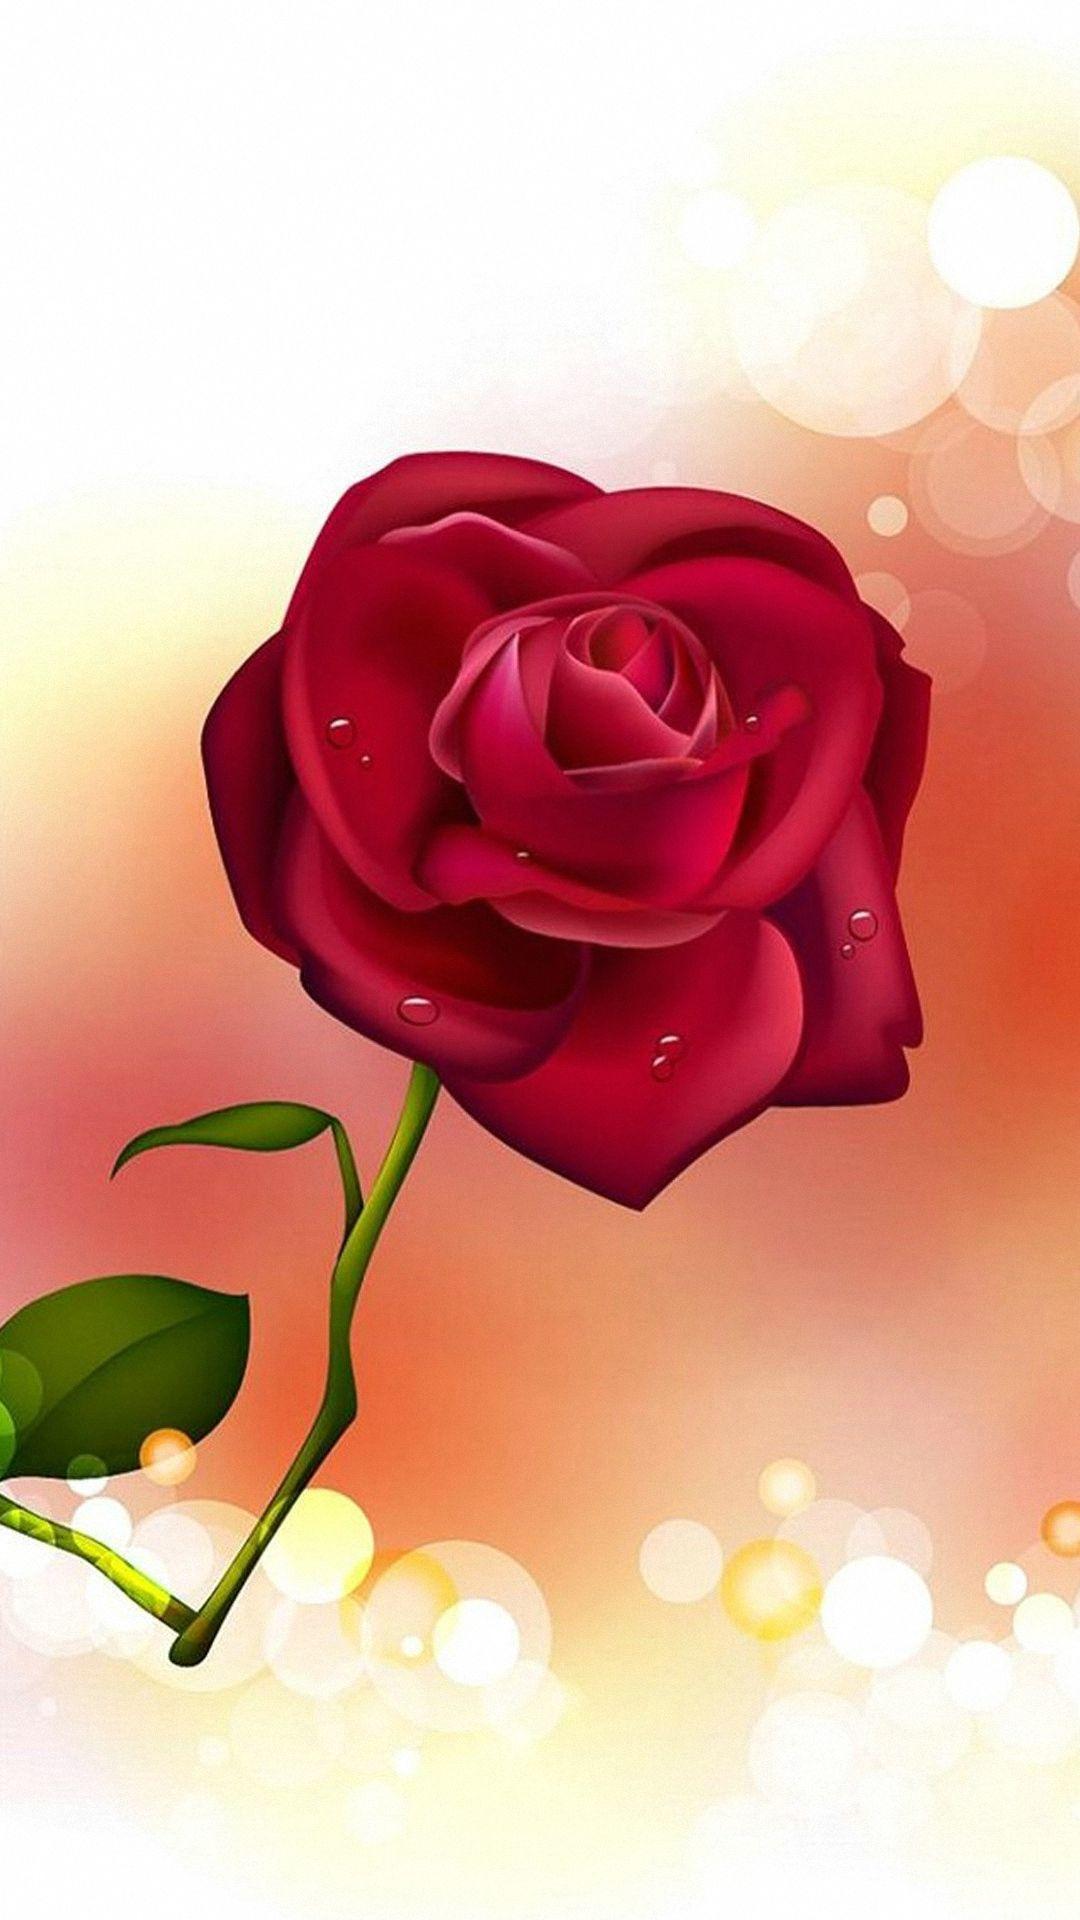 HD Rose Wallpaper For Mobile. Android